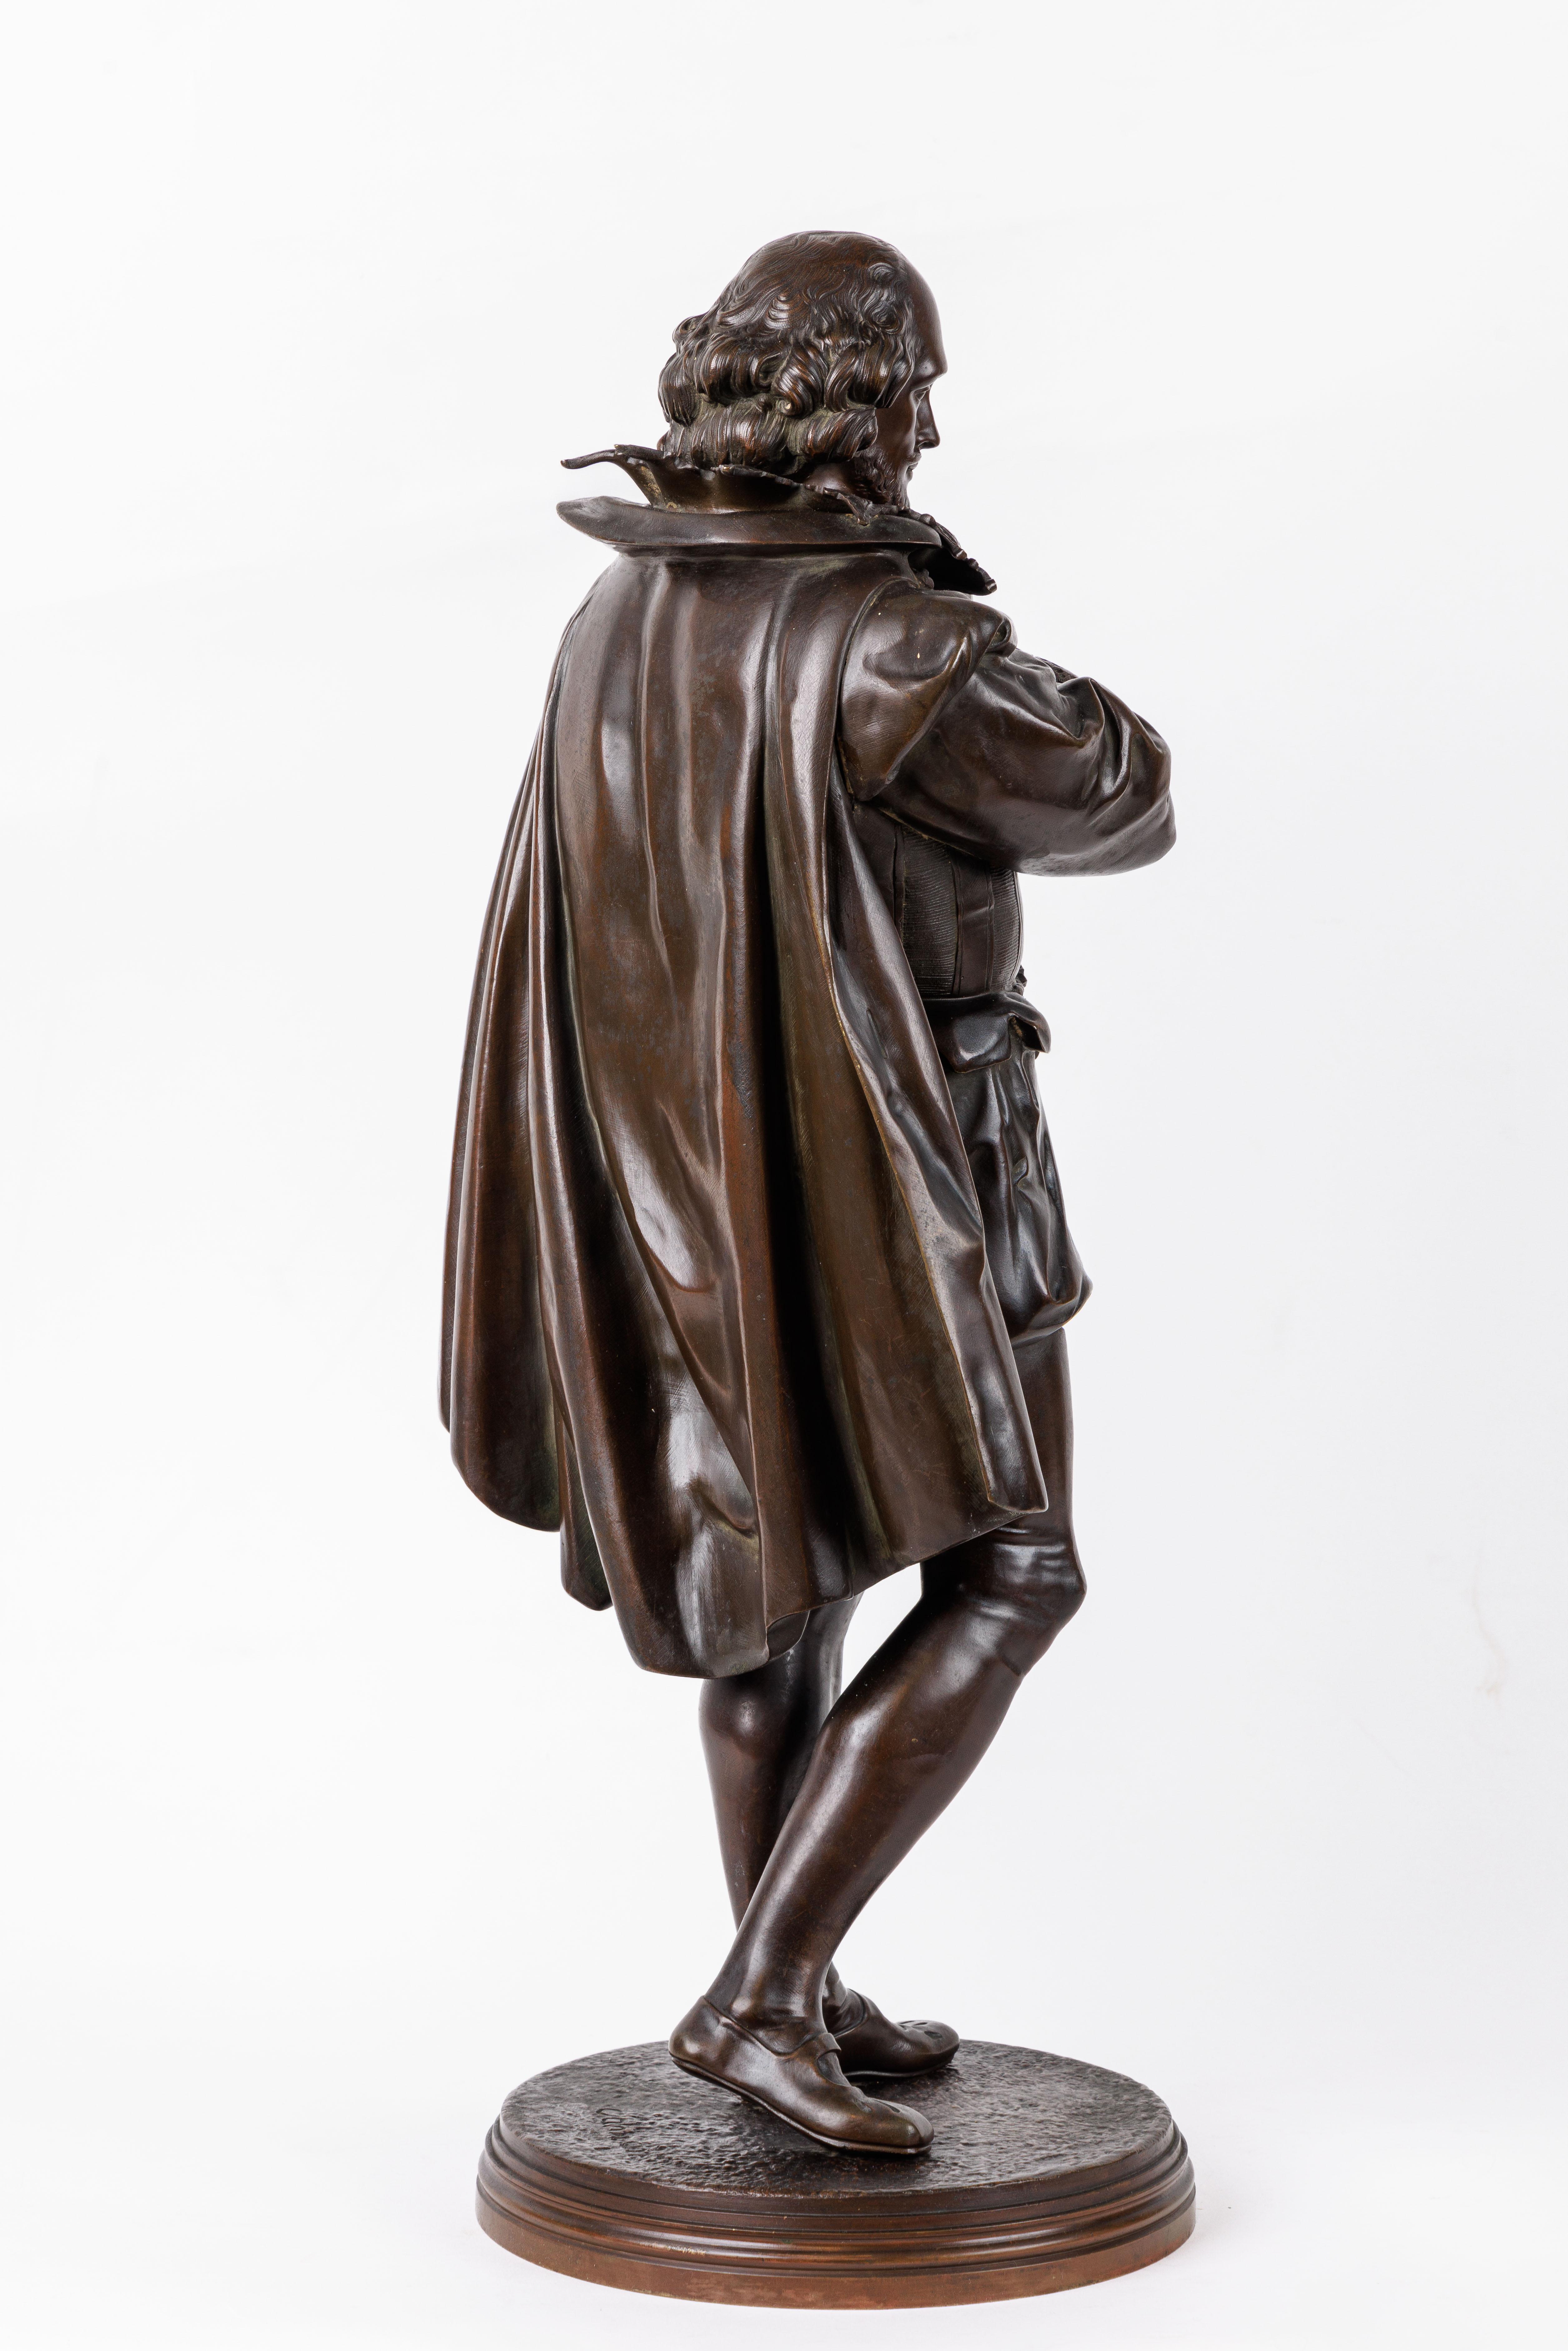 19th Century Jean Jules B. Salmson, A Patinated Bronze Sculpture of William Shakespeare For Sale